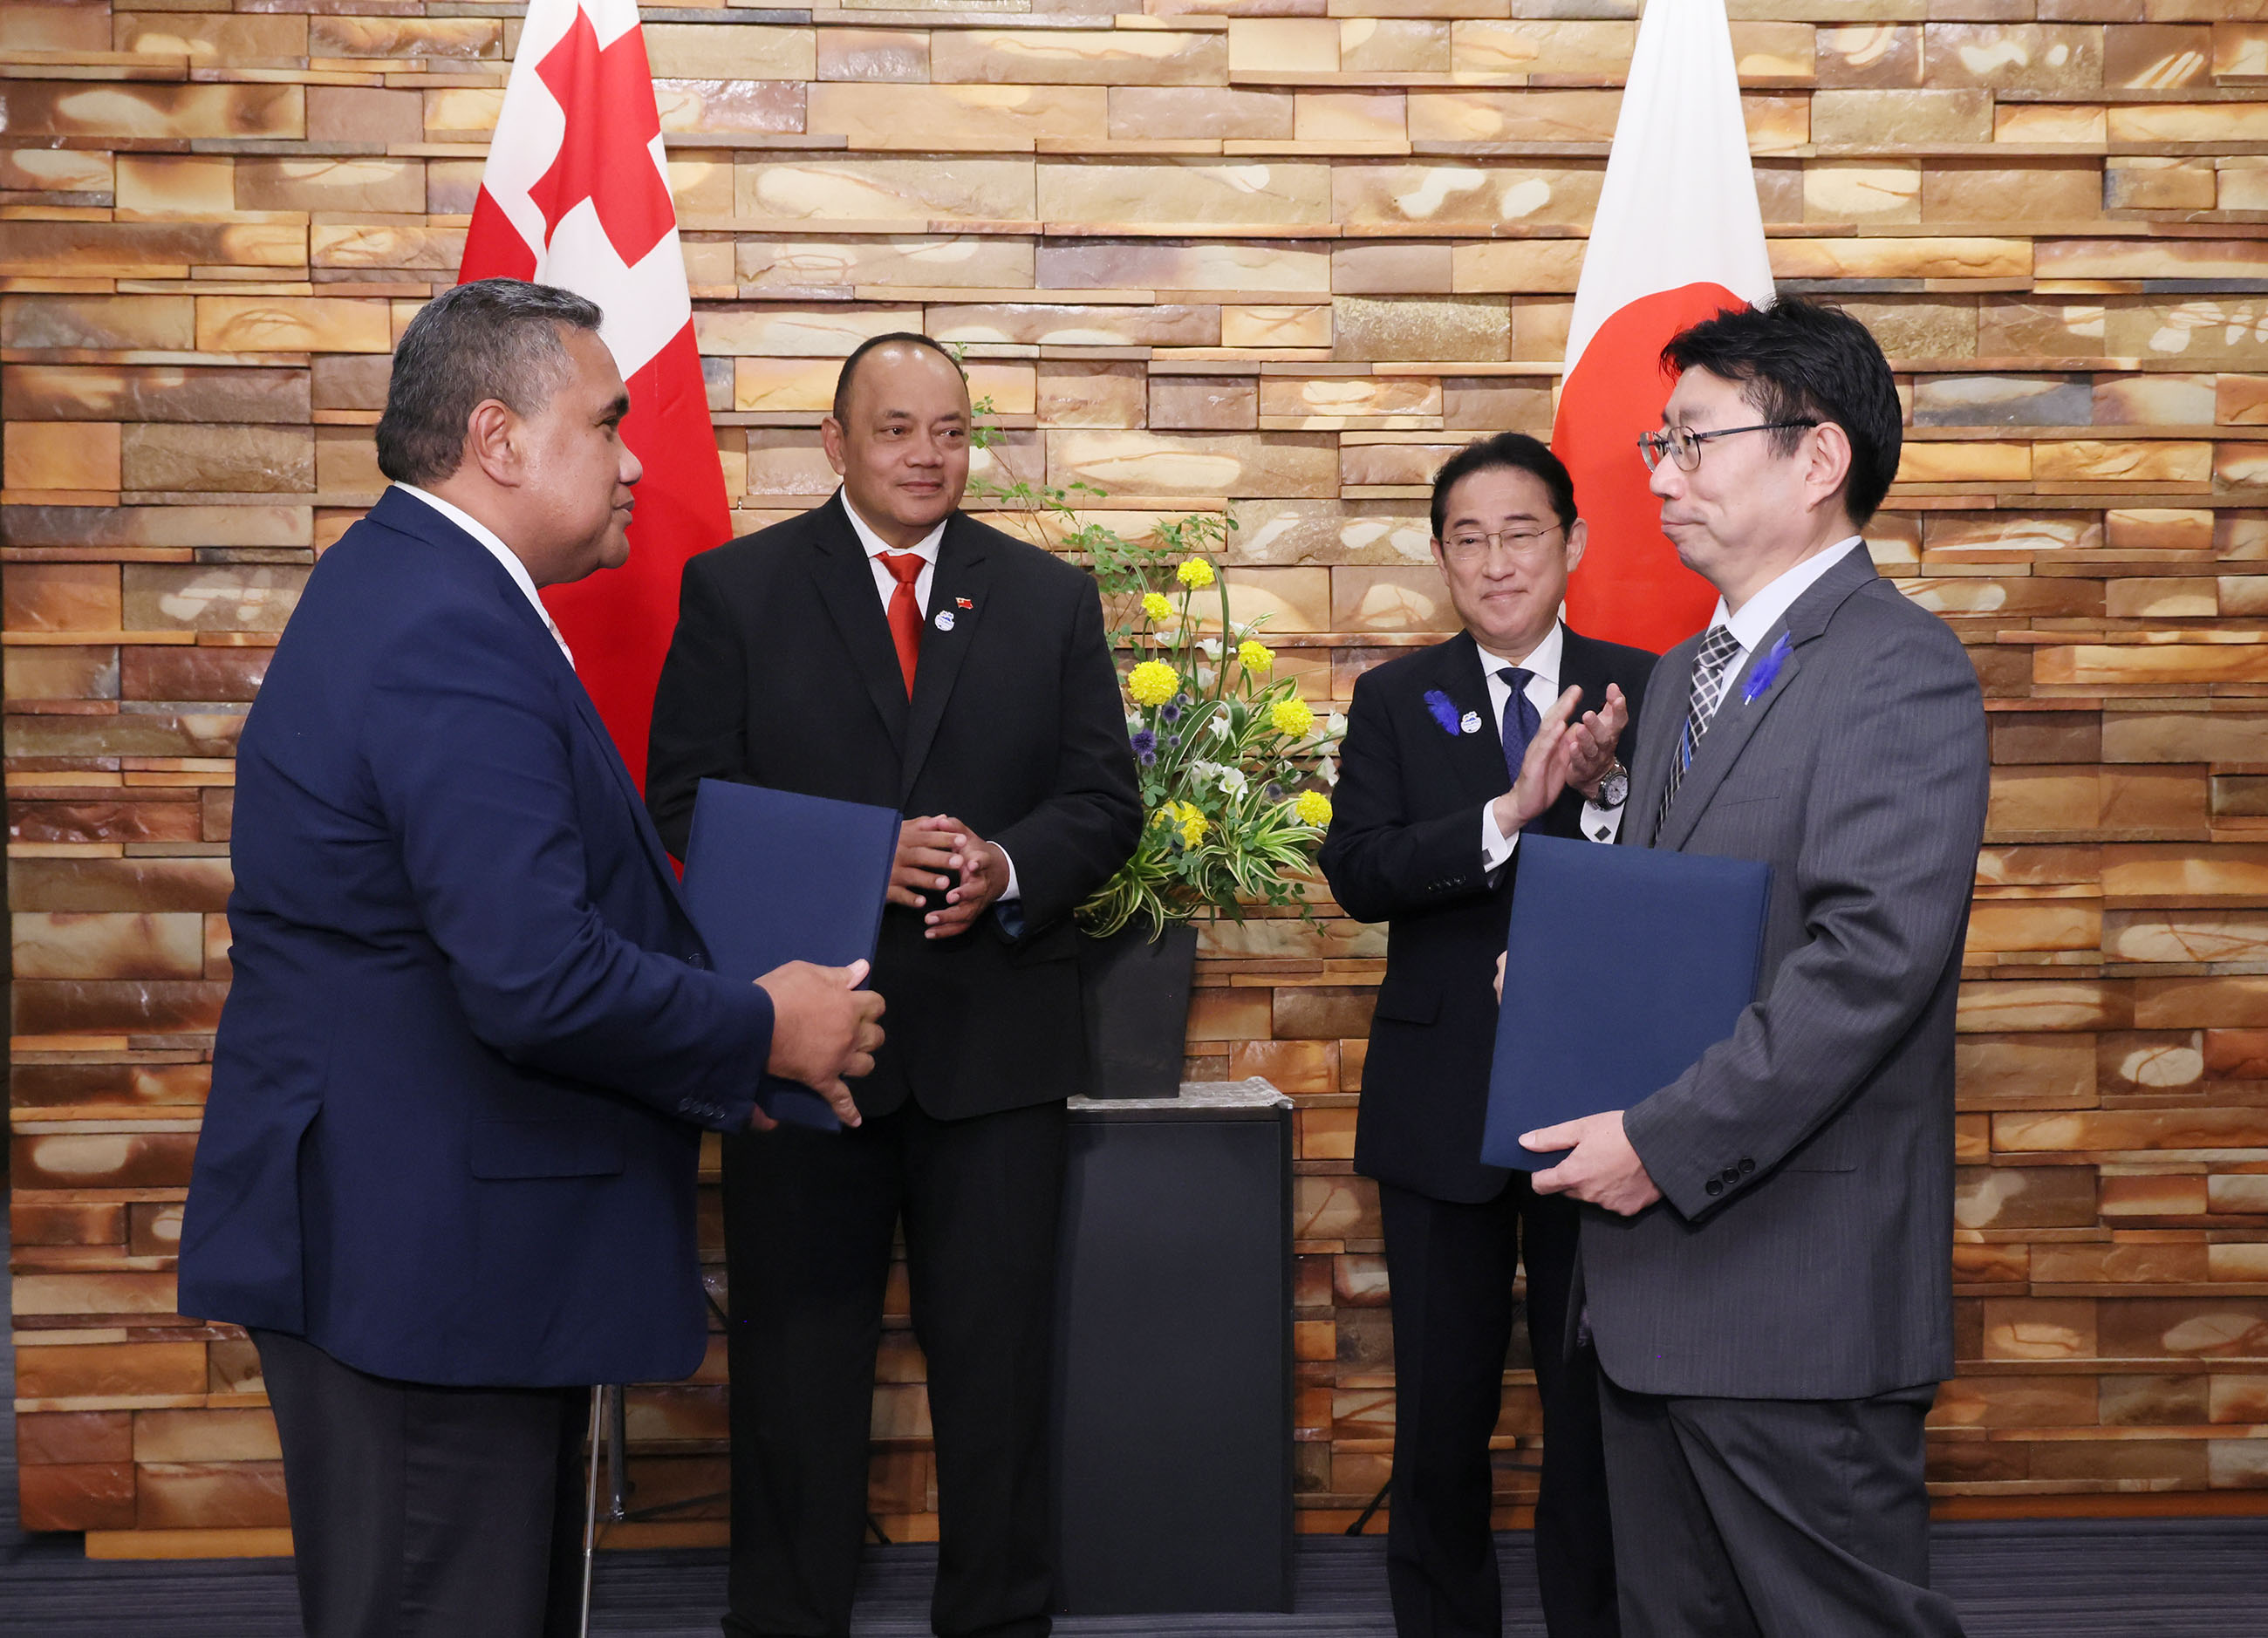 Exchange of Memorandum of Technical Cooperation document between Ministry of Land, Infrastructure, Transport and Tourism of Japan and Ministry for Public Enterprises, Kingdom of Tonga